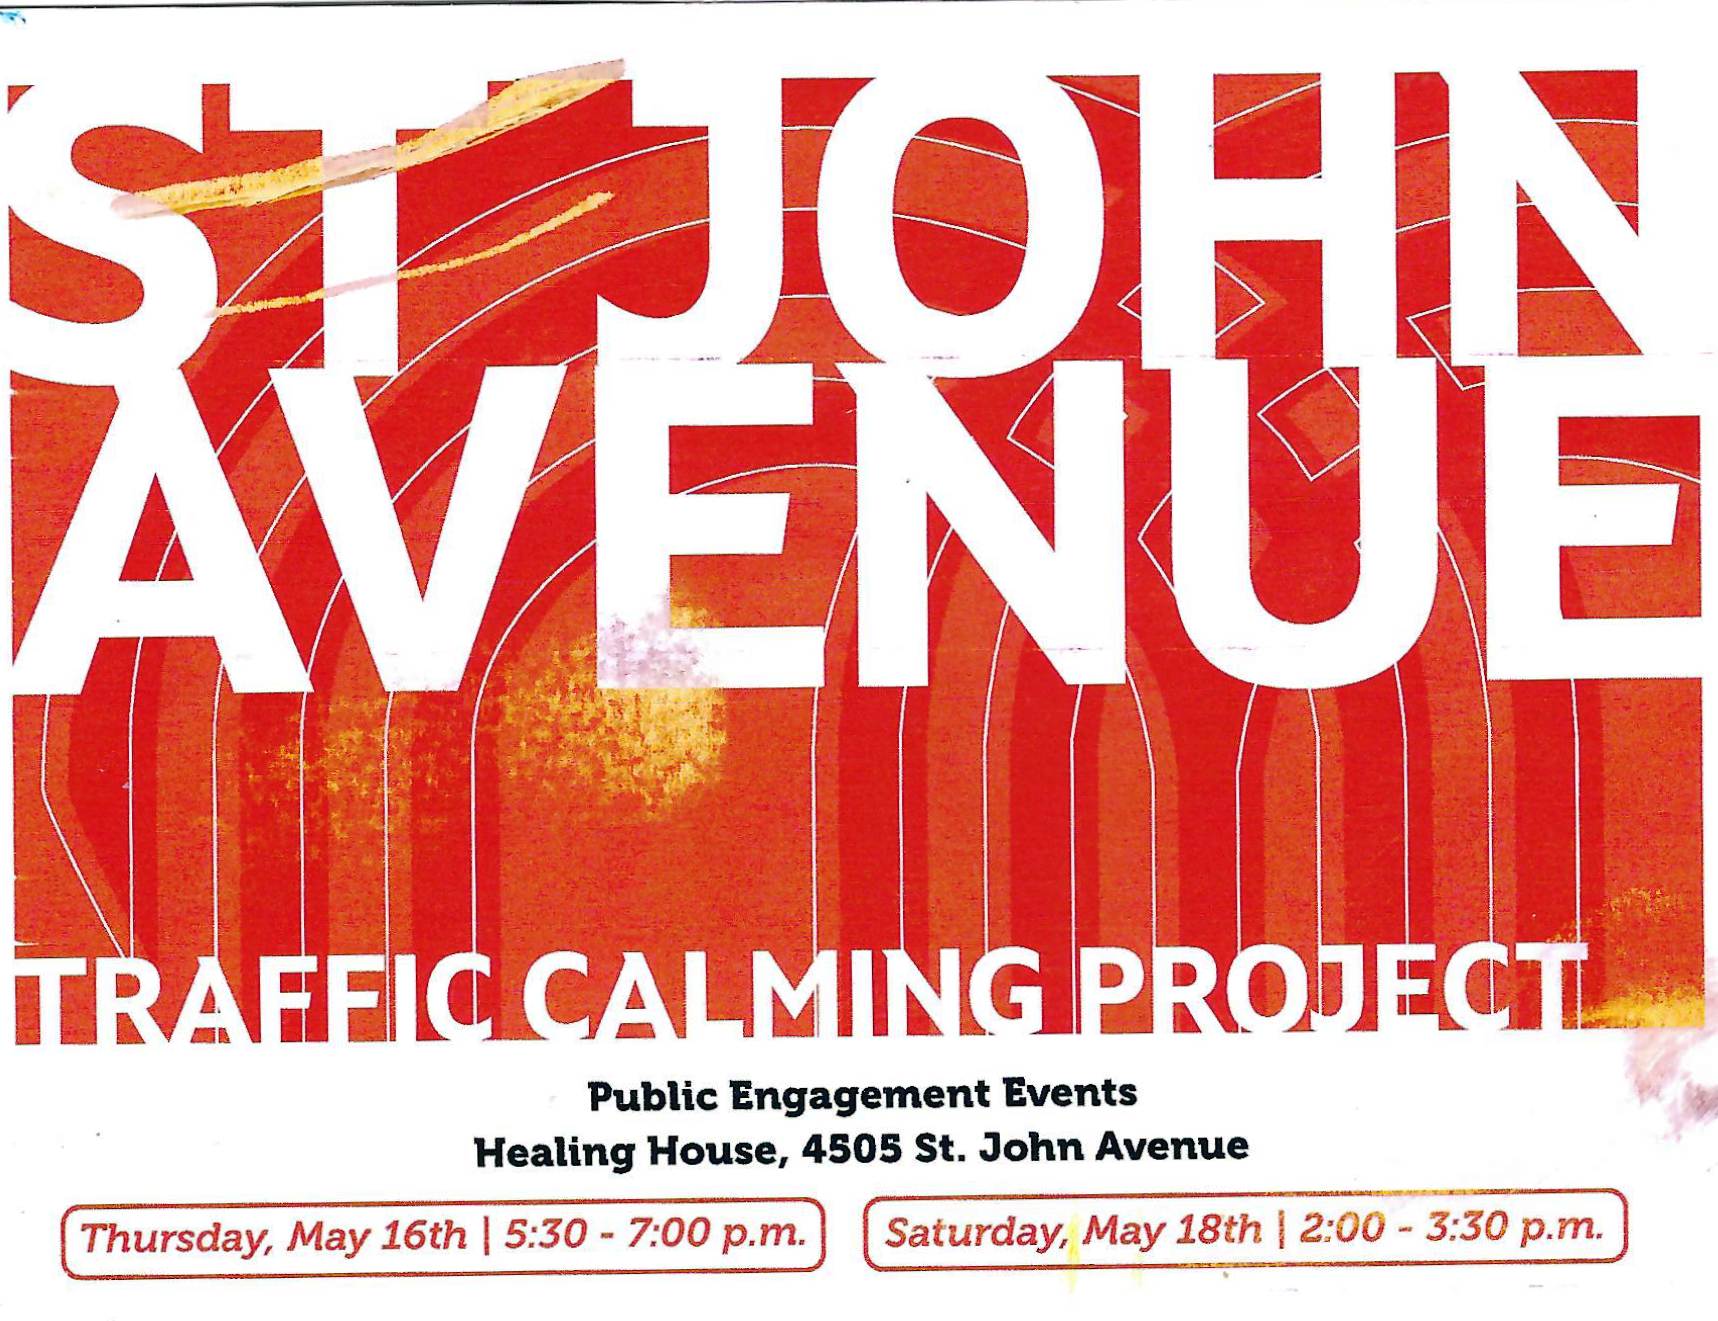 St. John Ave. Traffic Calming measures outlined at two public meetings